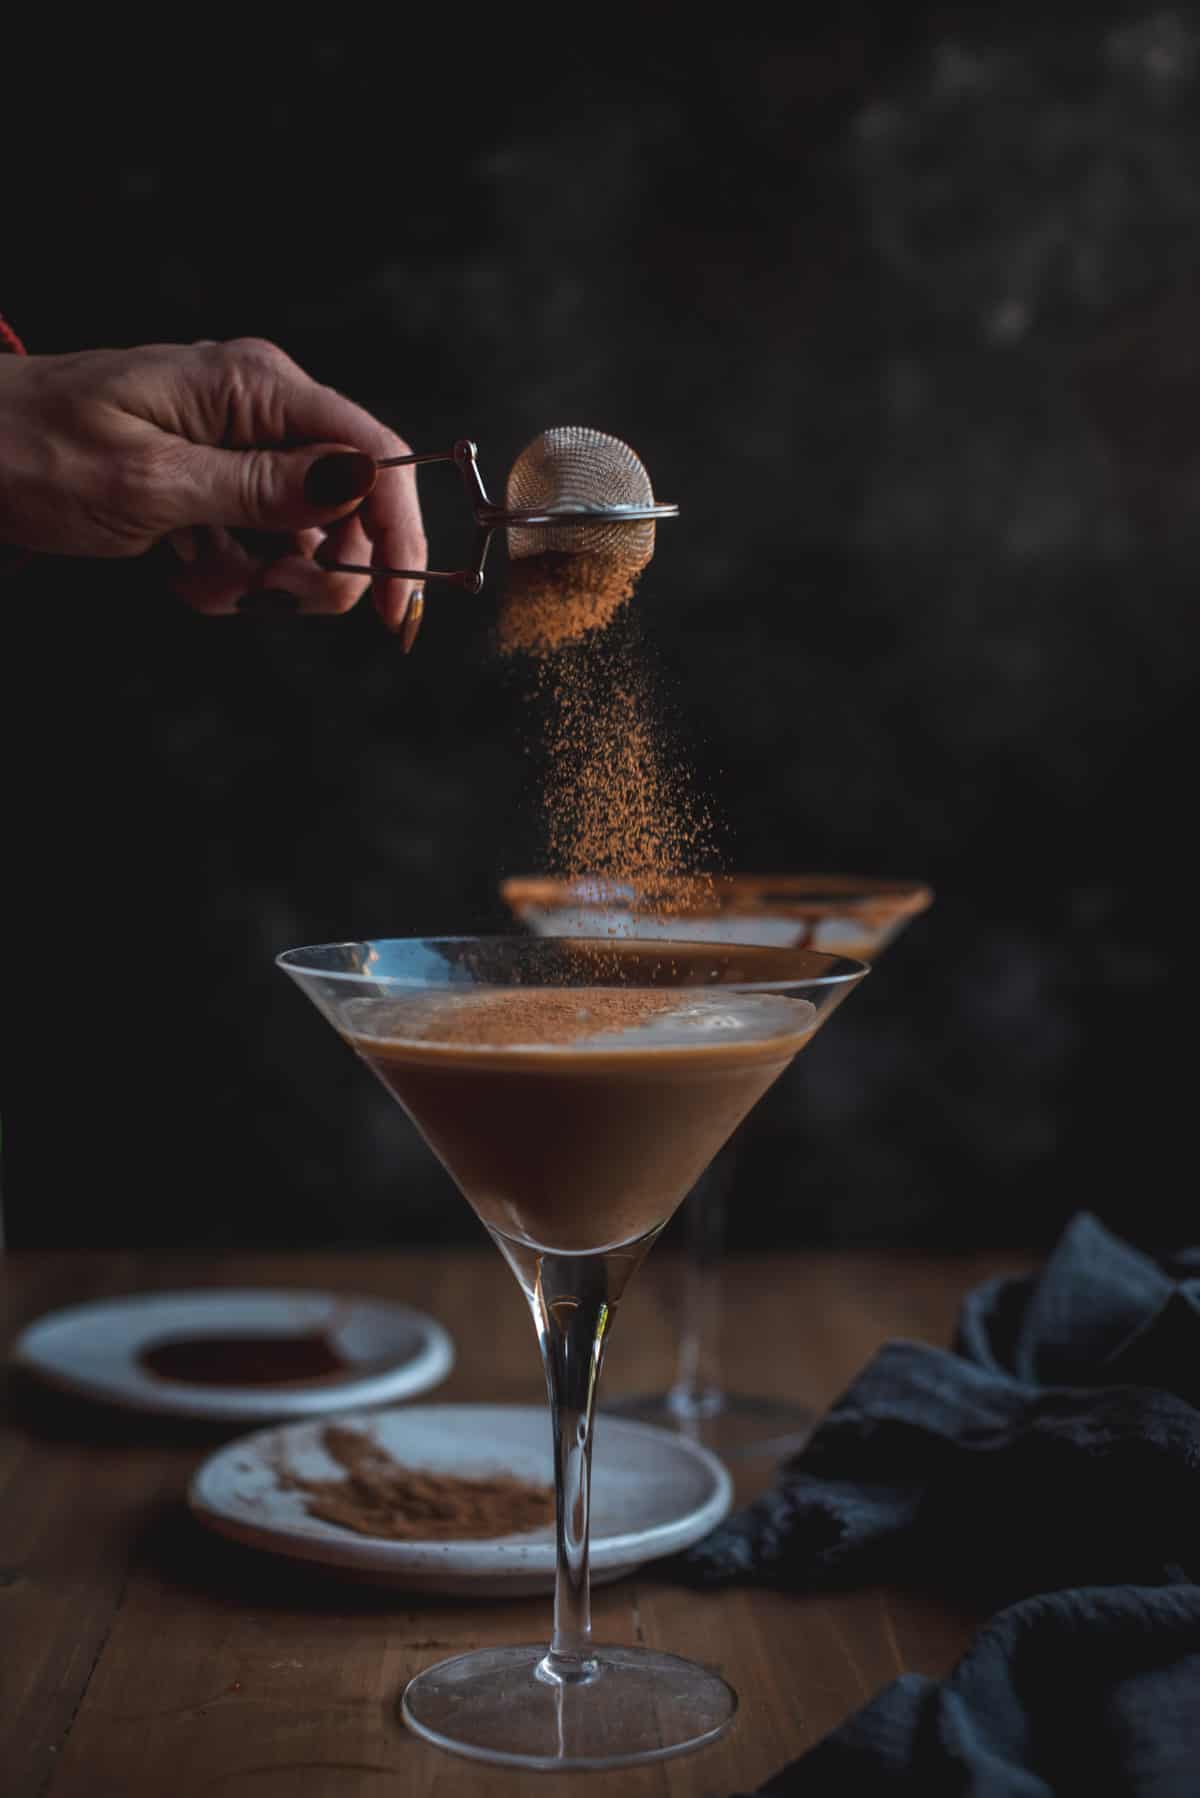 2 pumpkin espresso martinis sitting next to each other on a wooden table, 1 is behind the other so barley visible.  Cinnamon is being sifted through a small strainer on top of the cocktail. There are 2 white plates on the table also, 1 has cinnamon powder and the other is a sticky syrup so that the martini glass rims can be decorated with cinnamon powder.